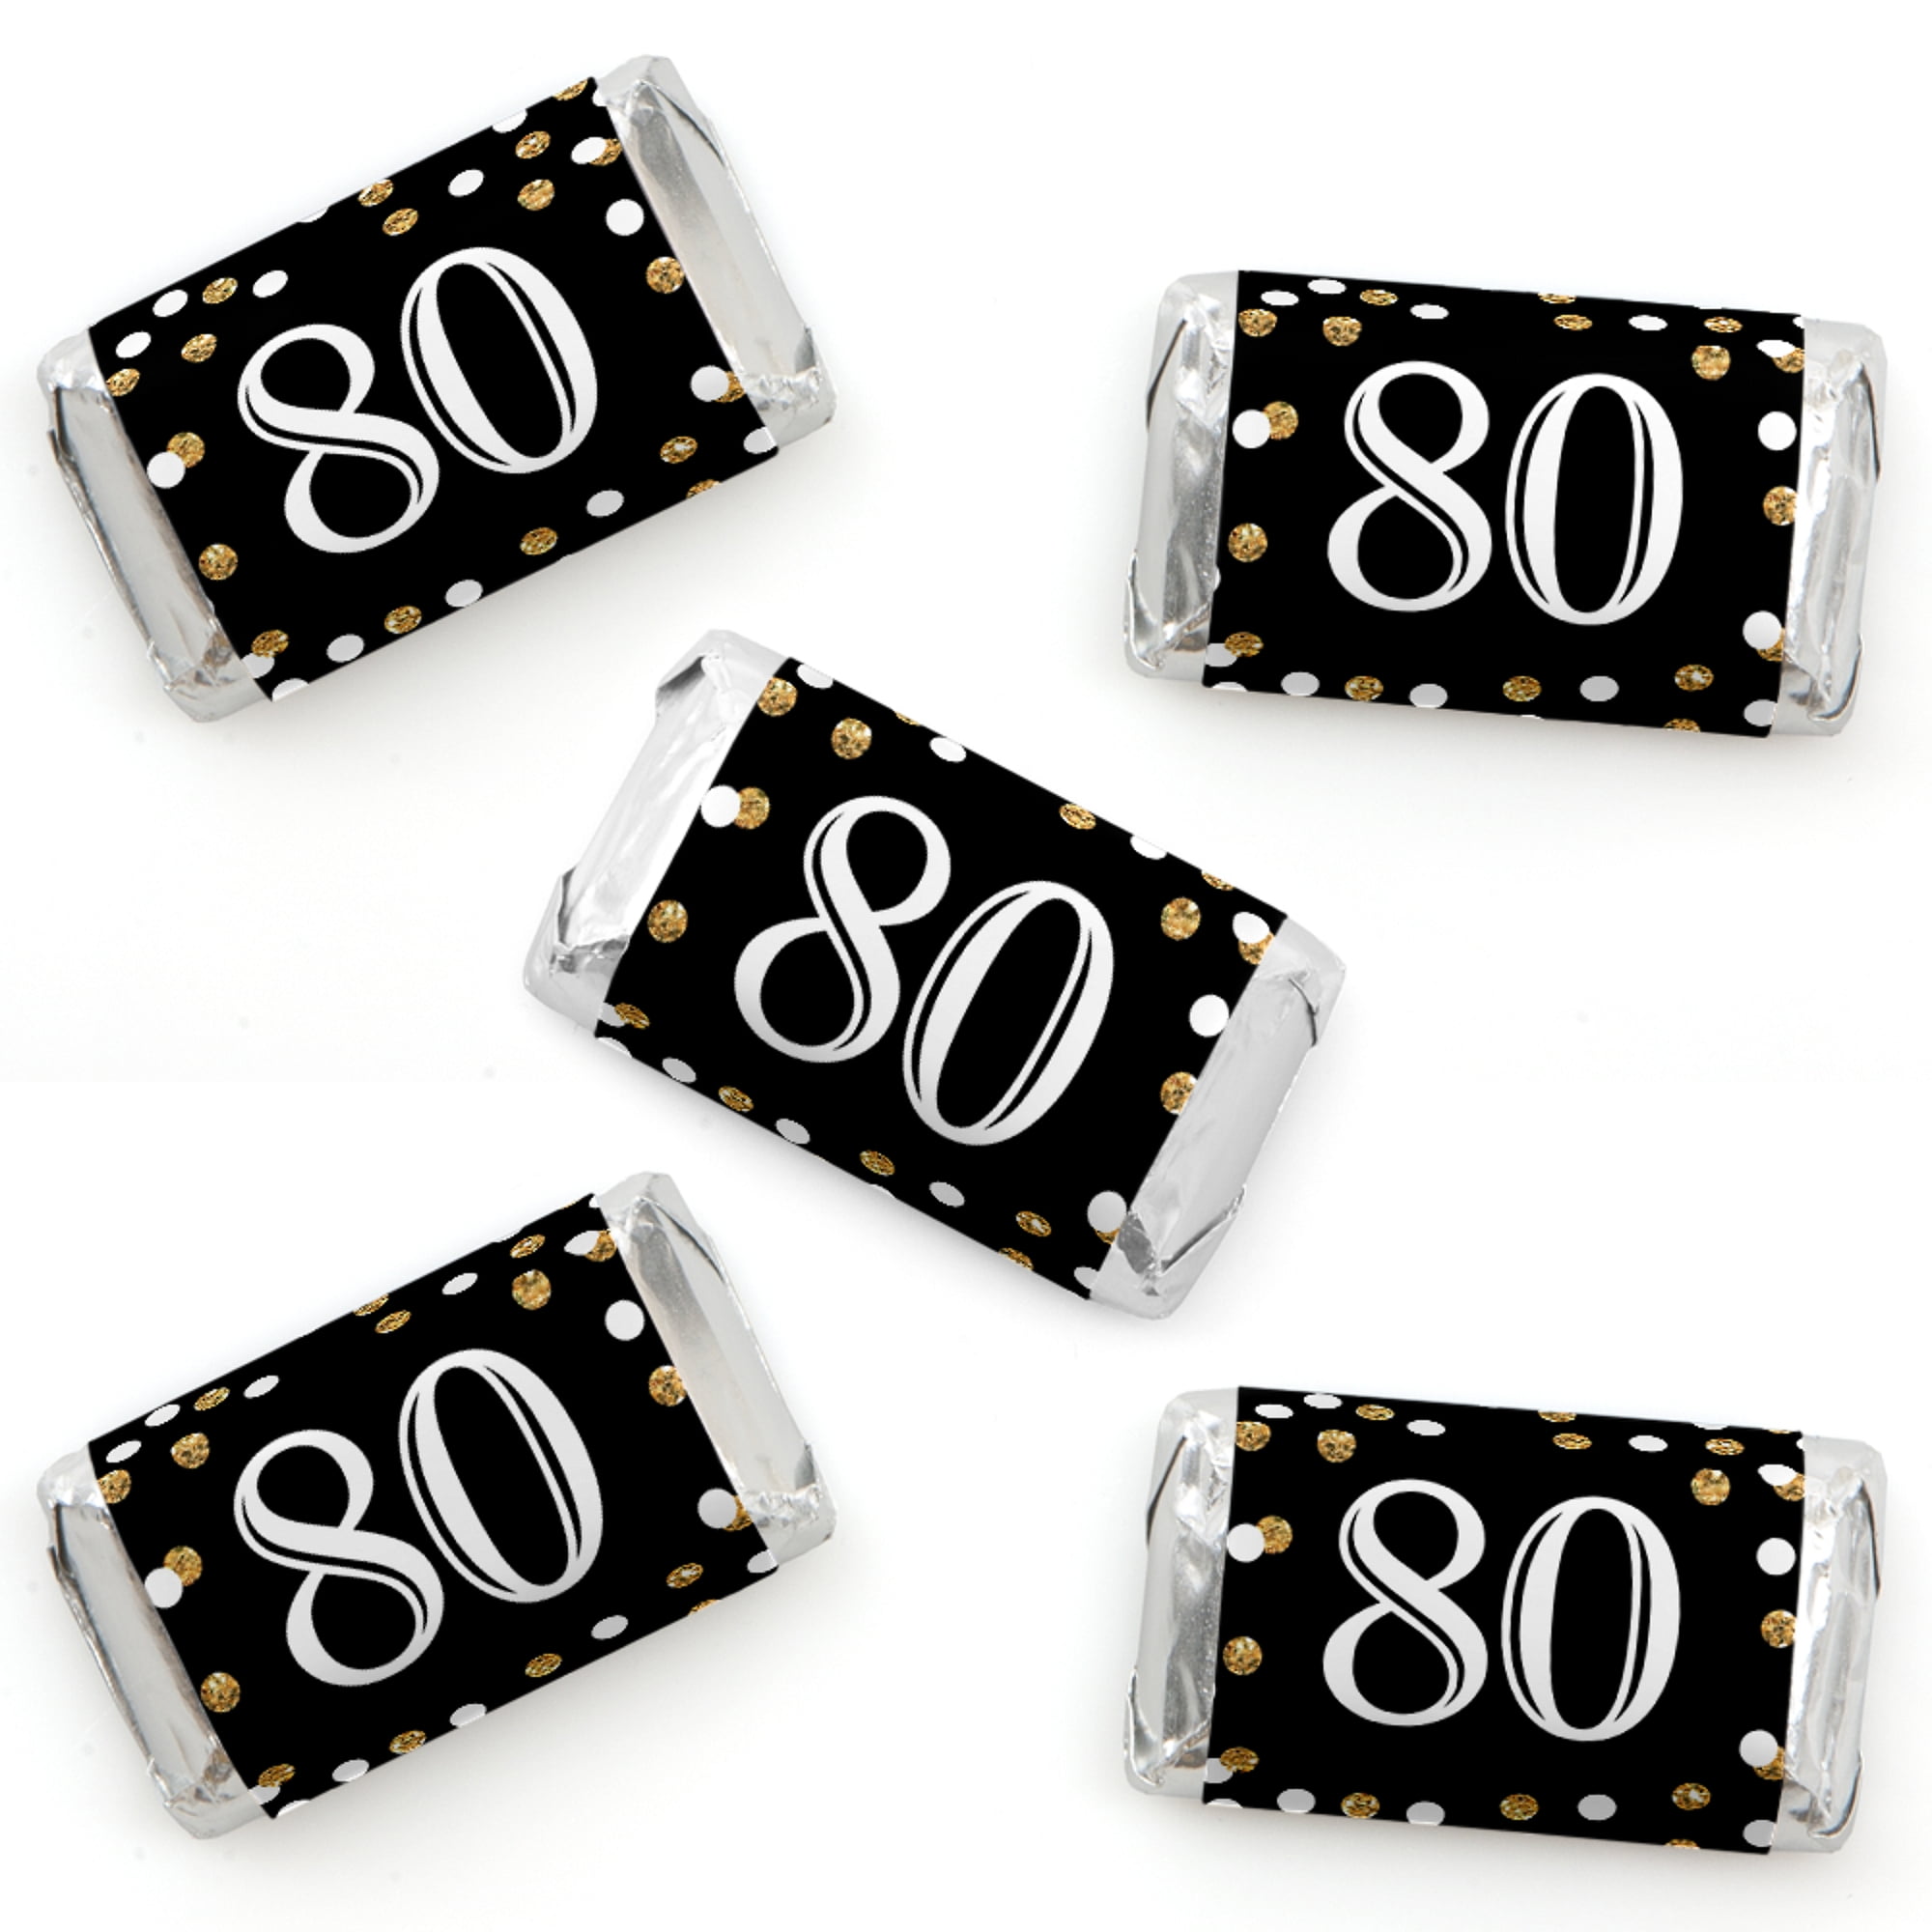 40 Count Mini Candy Bar Wrapper Stickers Birthday Party Small Favors Gold Adult 80th Birthday